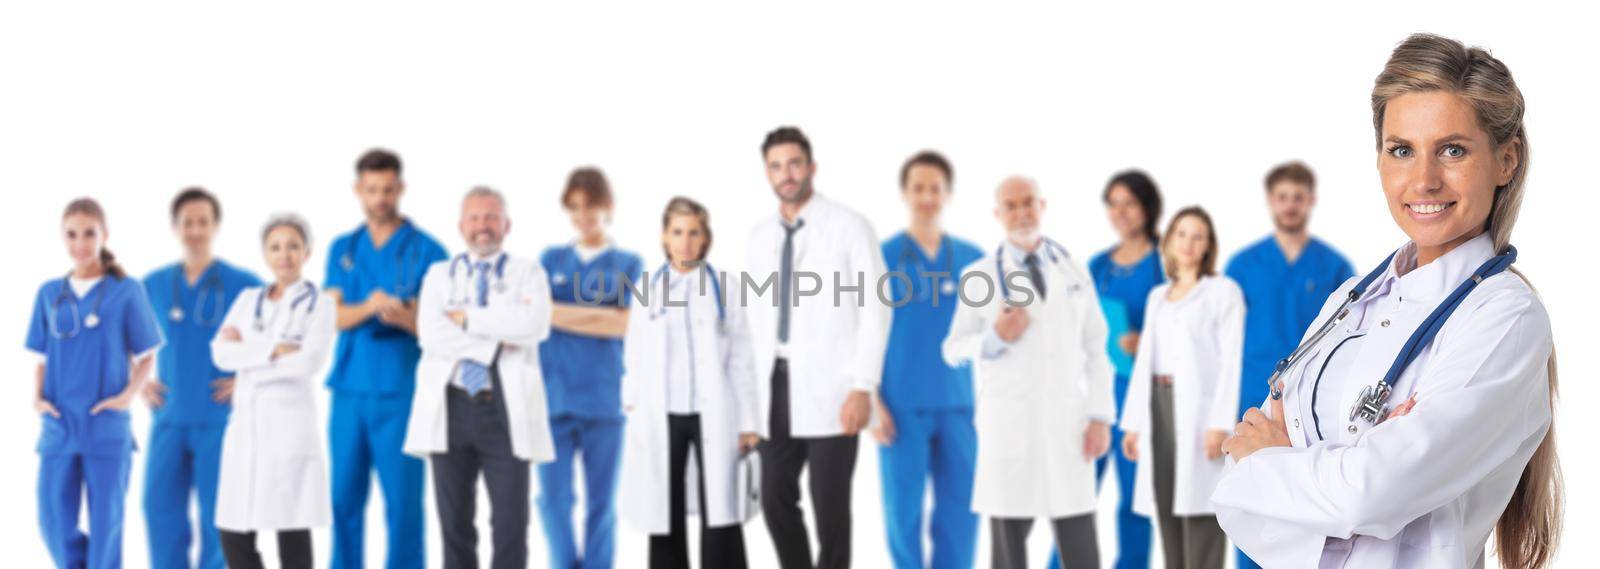 Medical team and female leader by ALotOfPeople